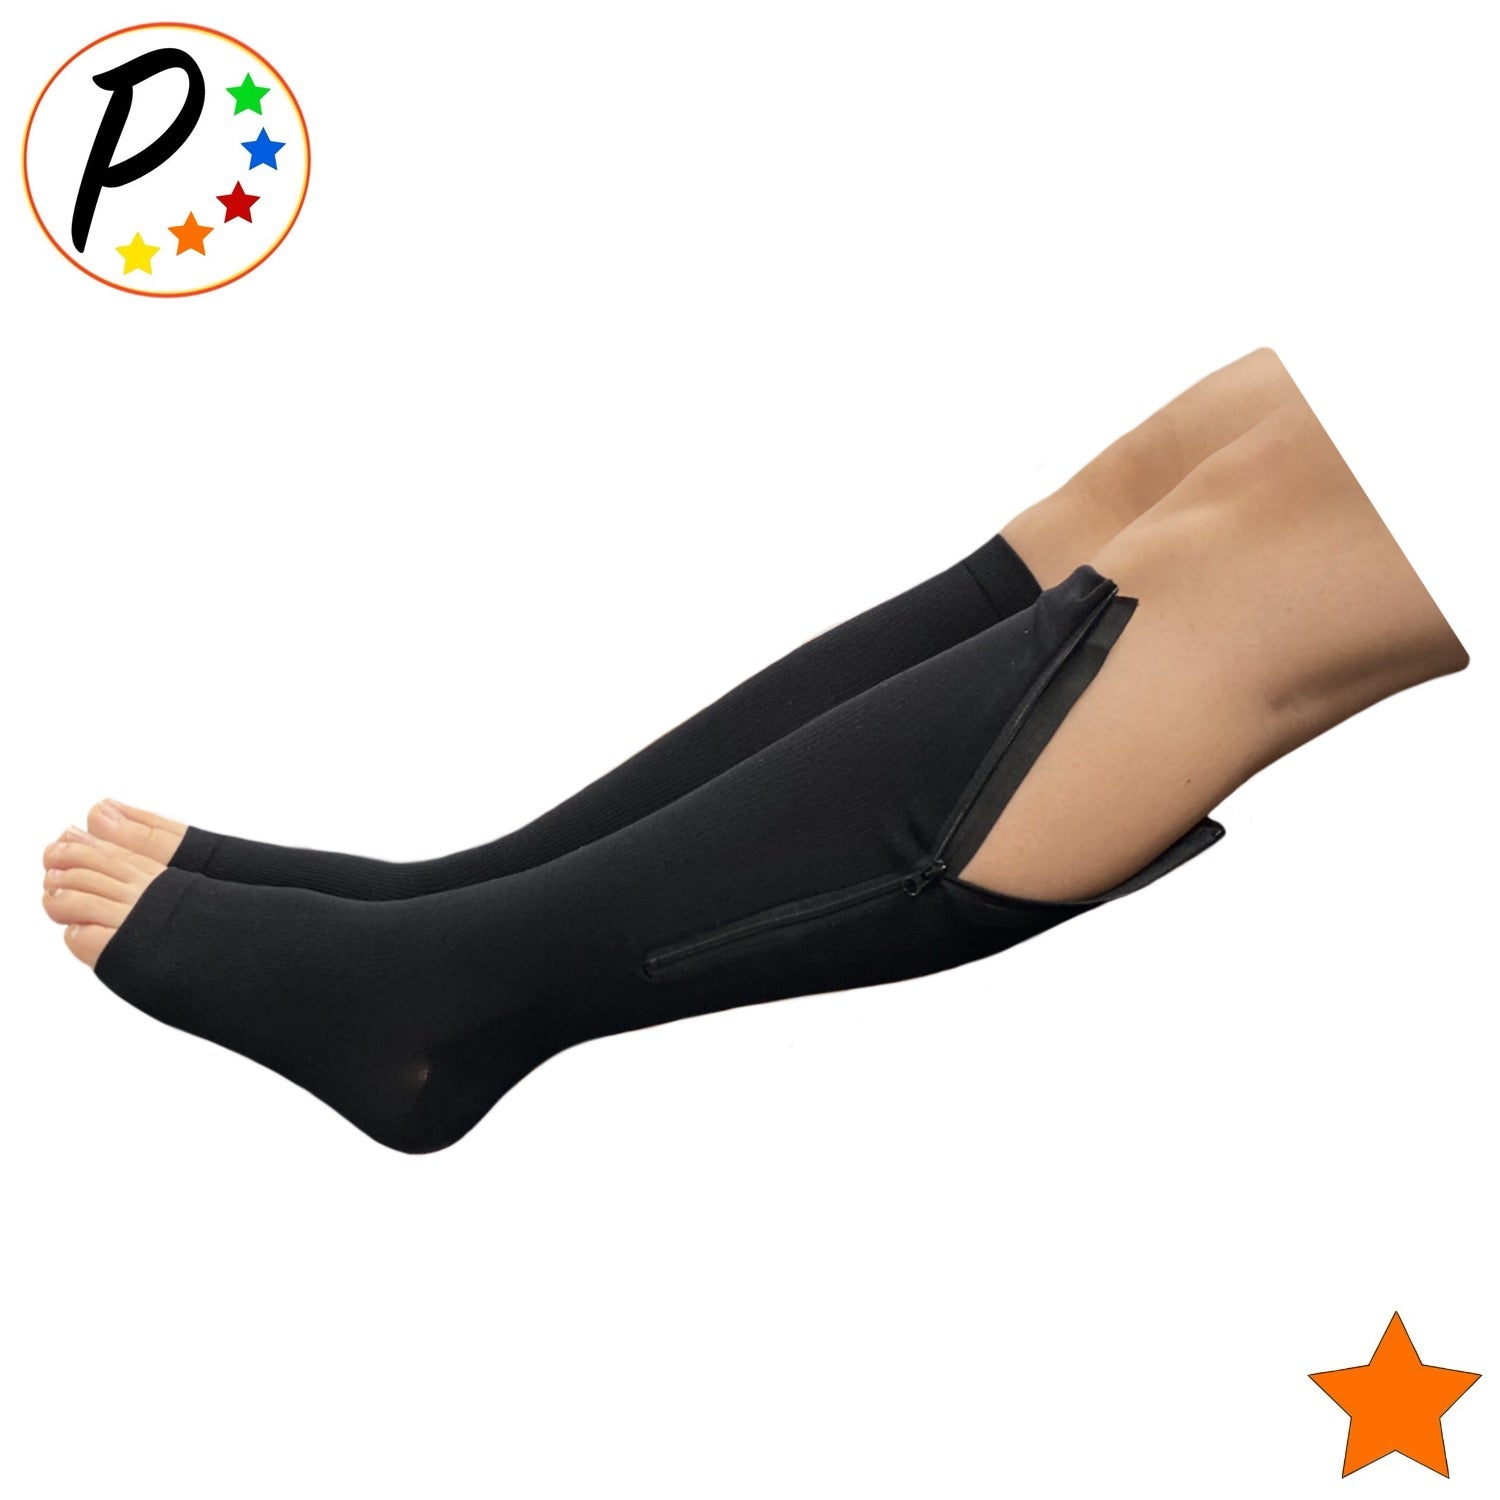 Buy Set of 2 Pairs Black Zipper Compression Socks with Open Toe  (S/M)-15-20mmHg at ShopLC.